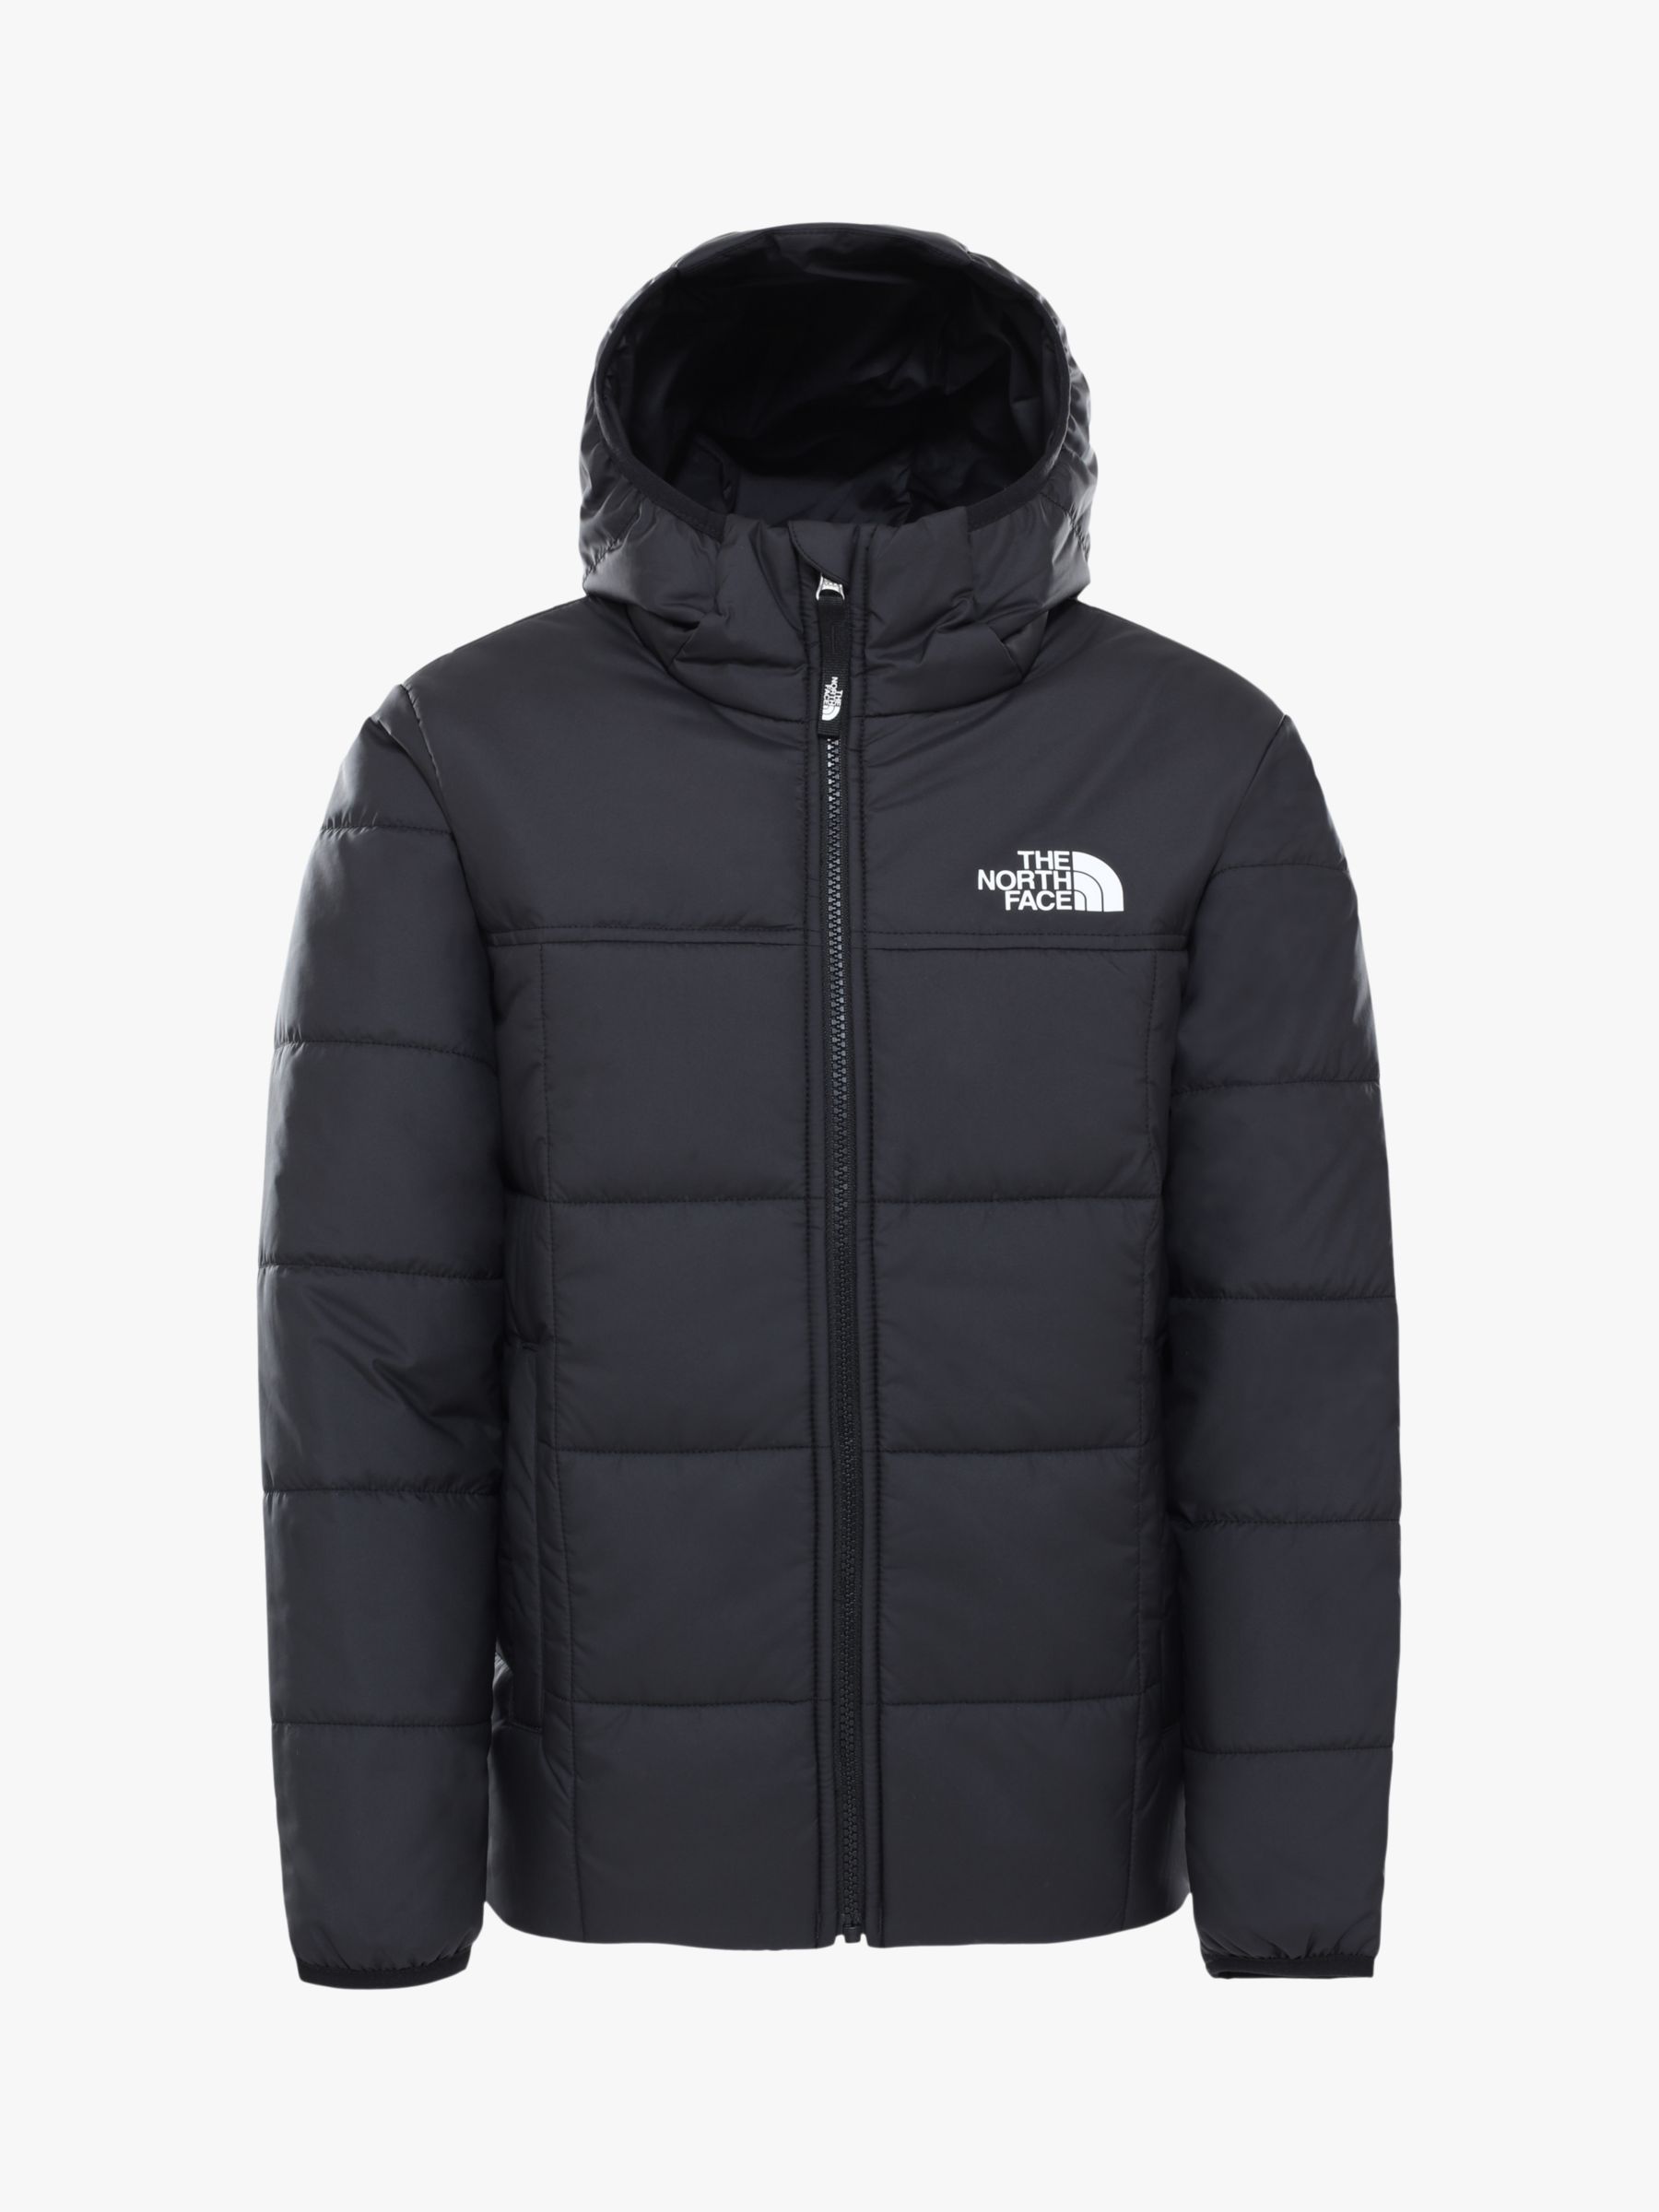 the north face mens ryeford jacket review